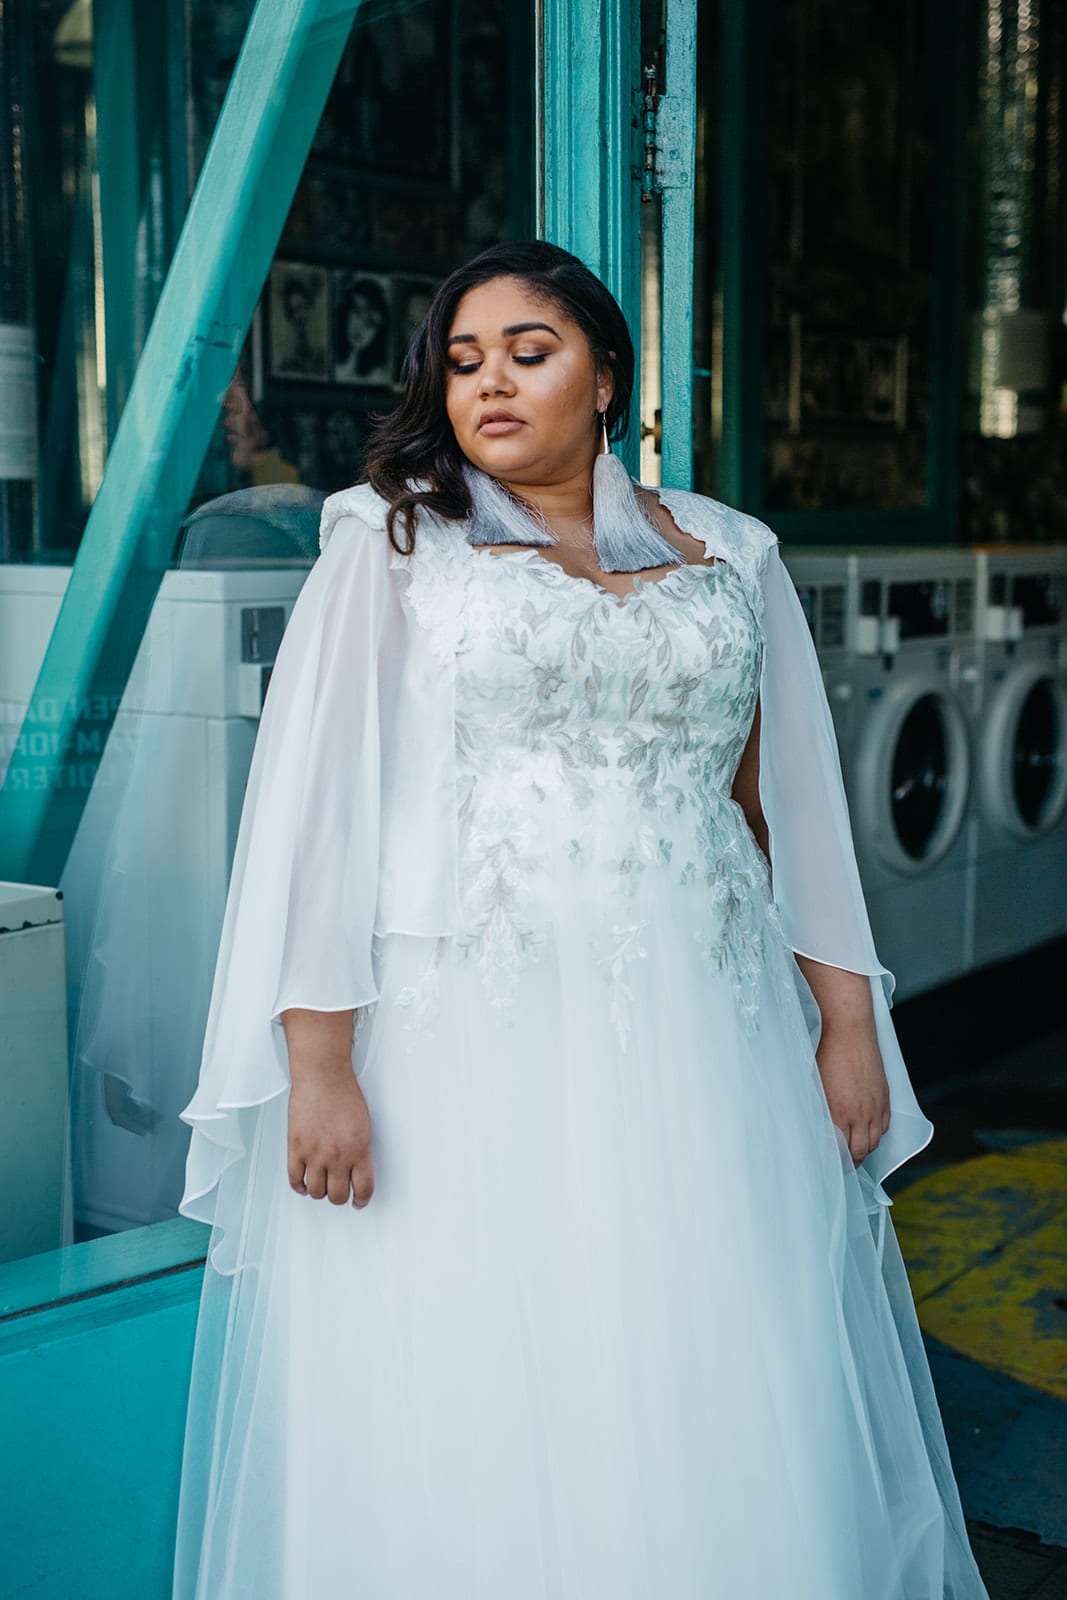 A woman in a plus size wedding dress with an embroidered bodice and capelet from Lace & Liberty stands in the entrance of a laundromat